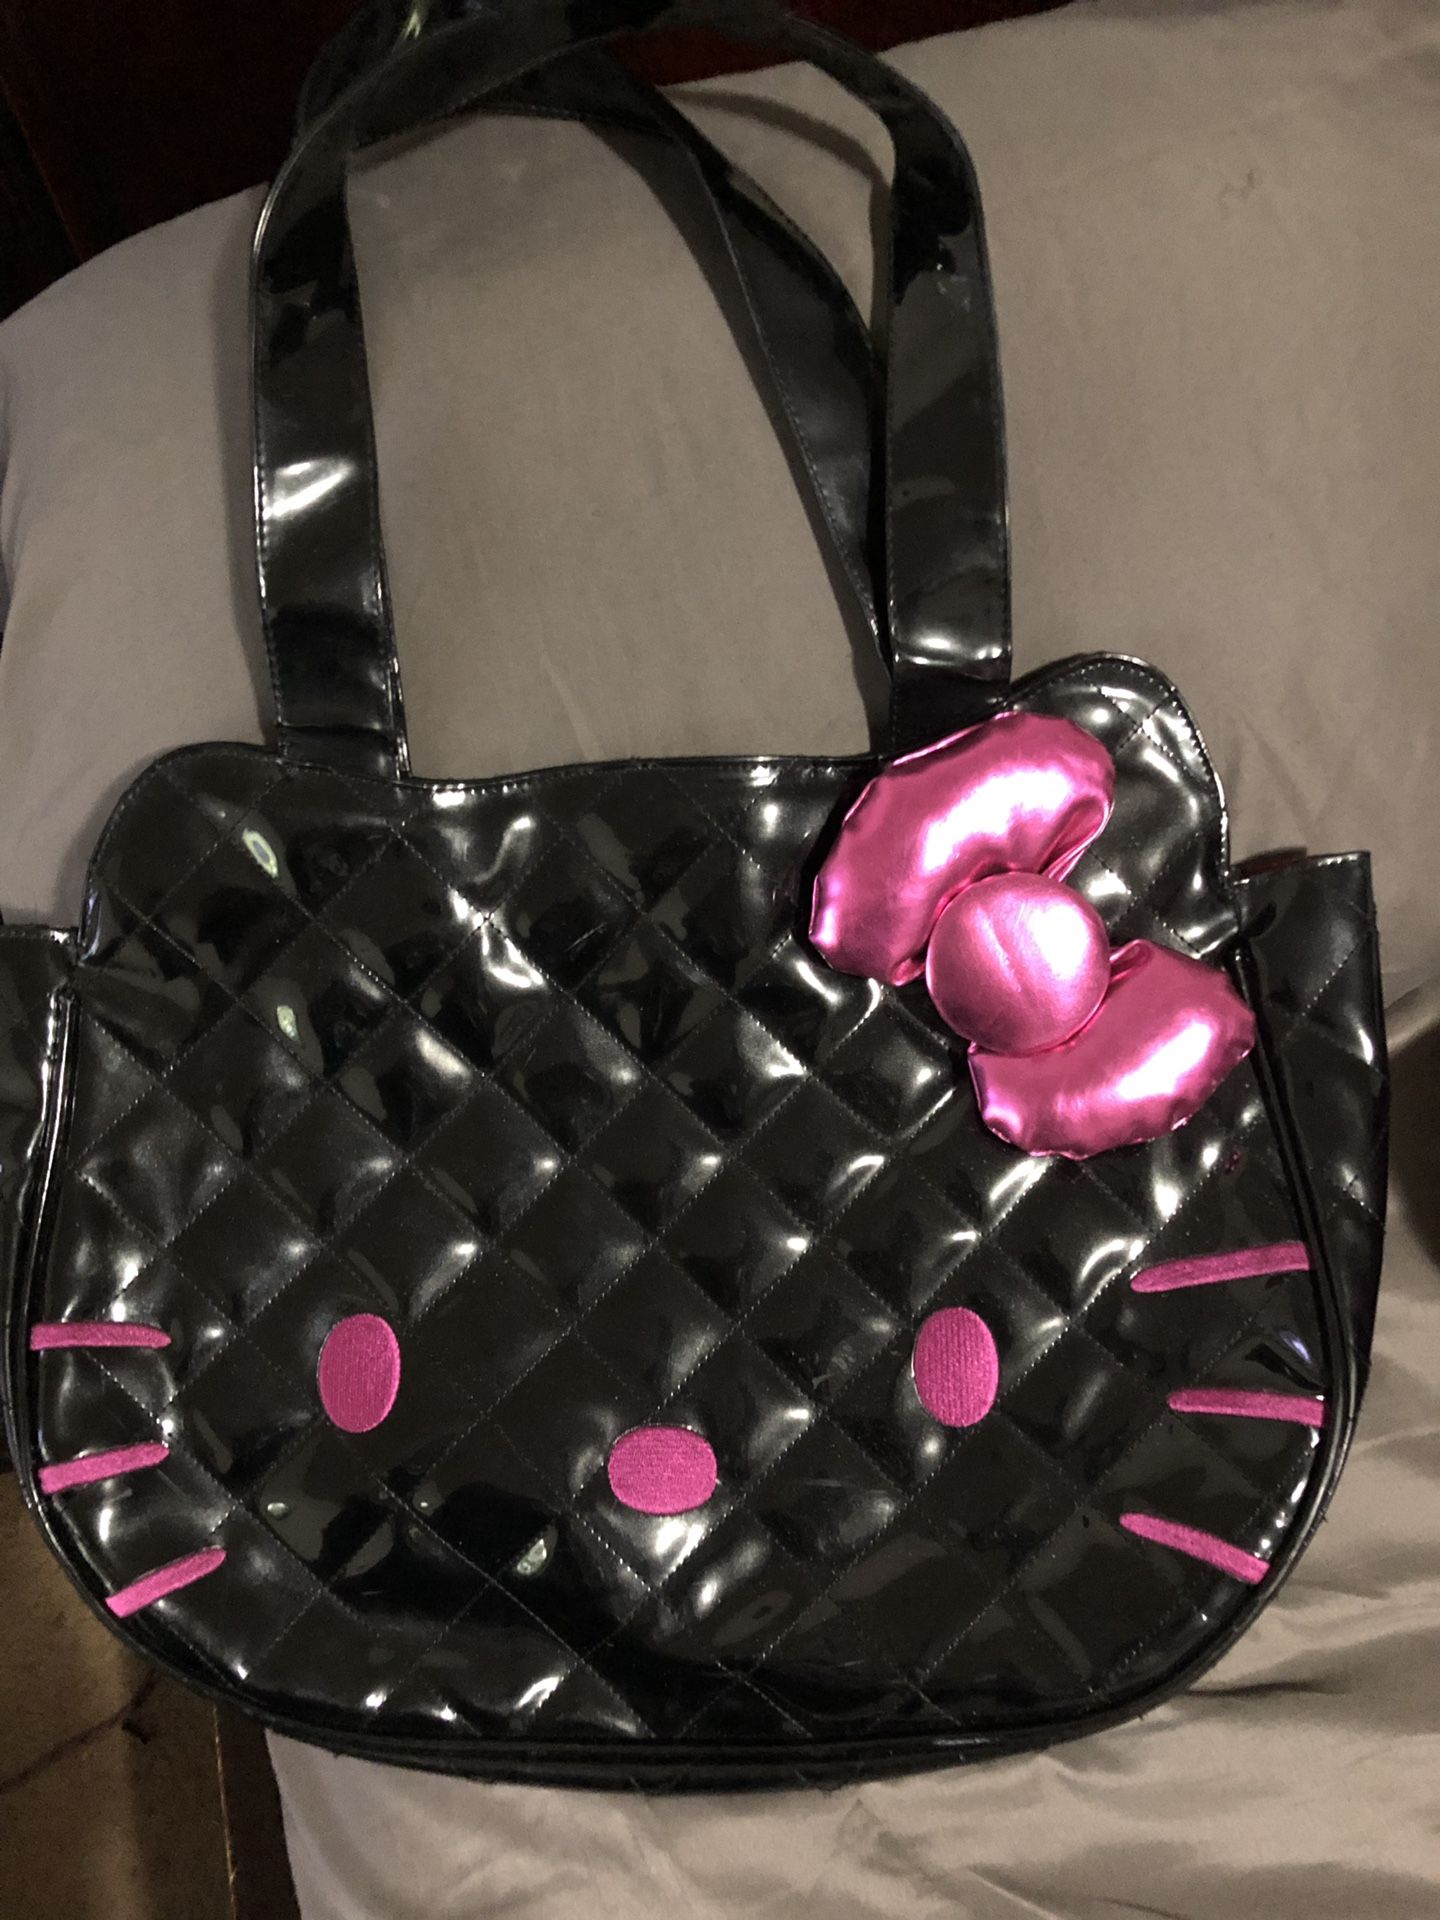 Hello Kitty Purse. No shipping cost if local, will meet up and deliver.